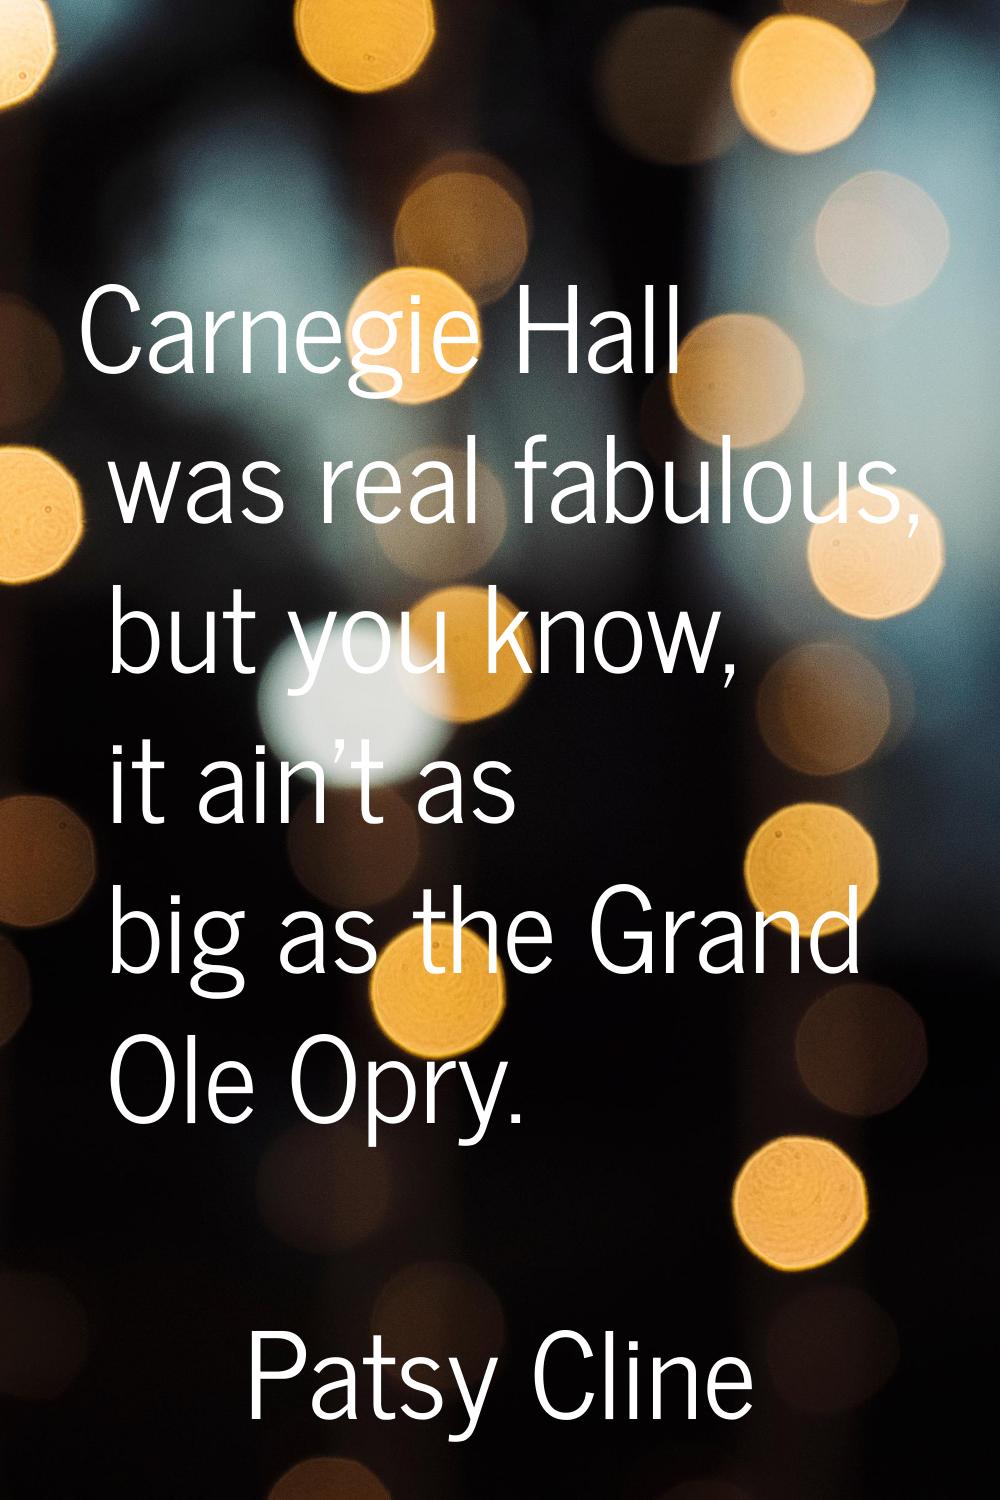 Carnegie Hall was real fabulous, but you know, it ain't as big as the Grand Ole Opry.